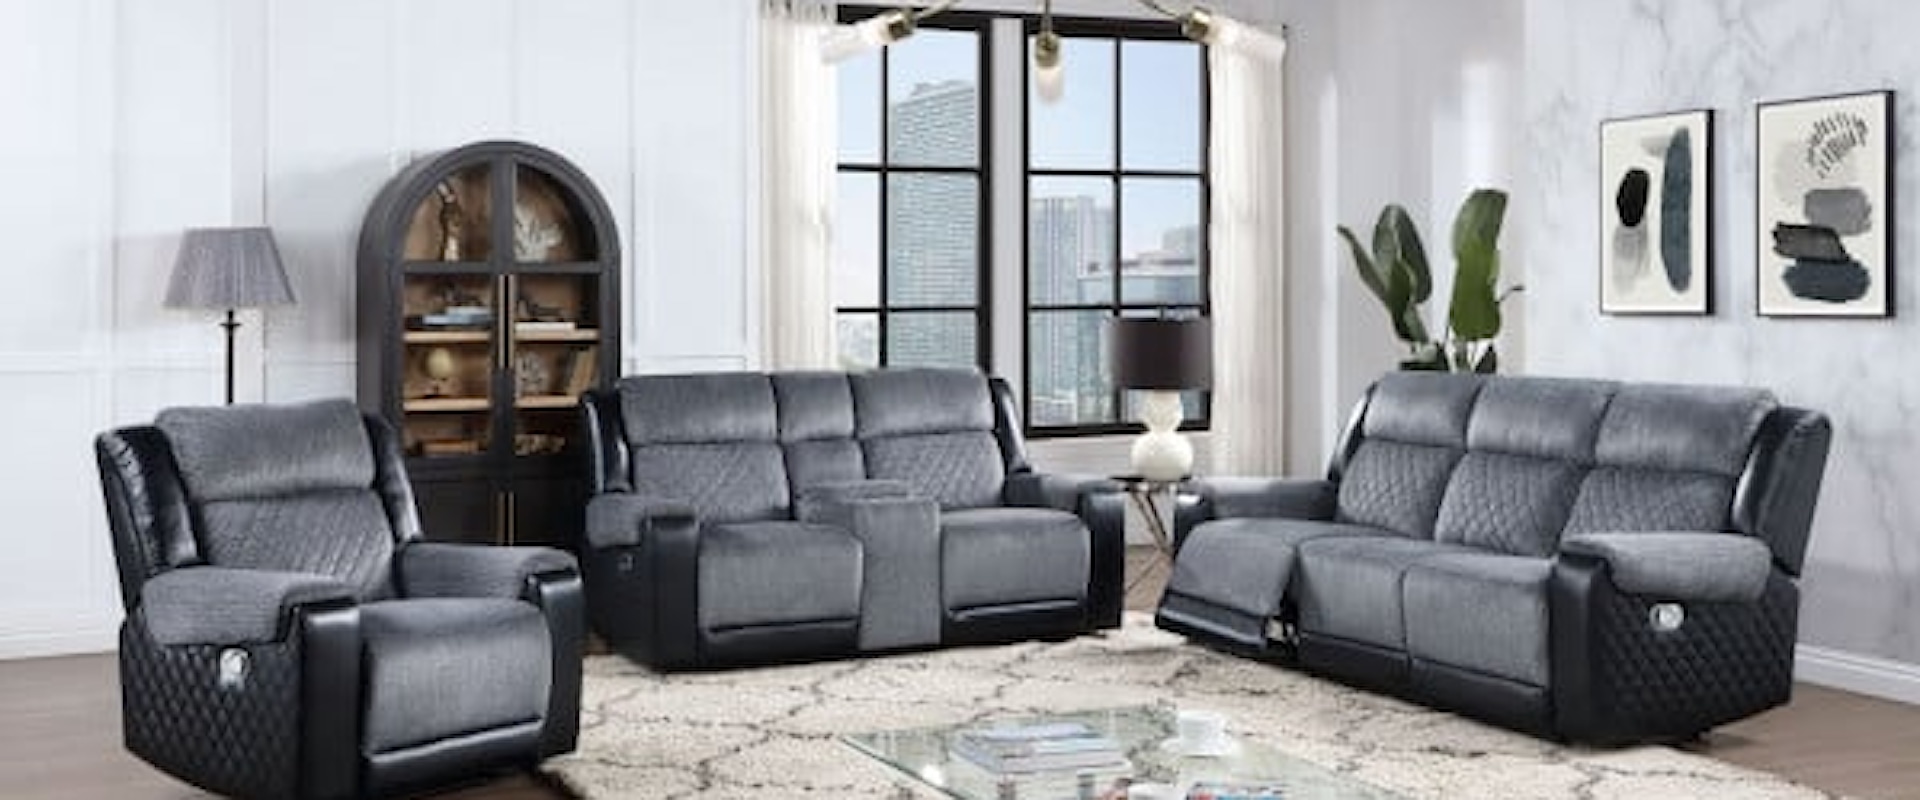 MINSK BLACK AND GREY SOFA AND | LOVESEAT